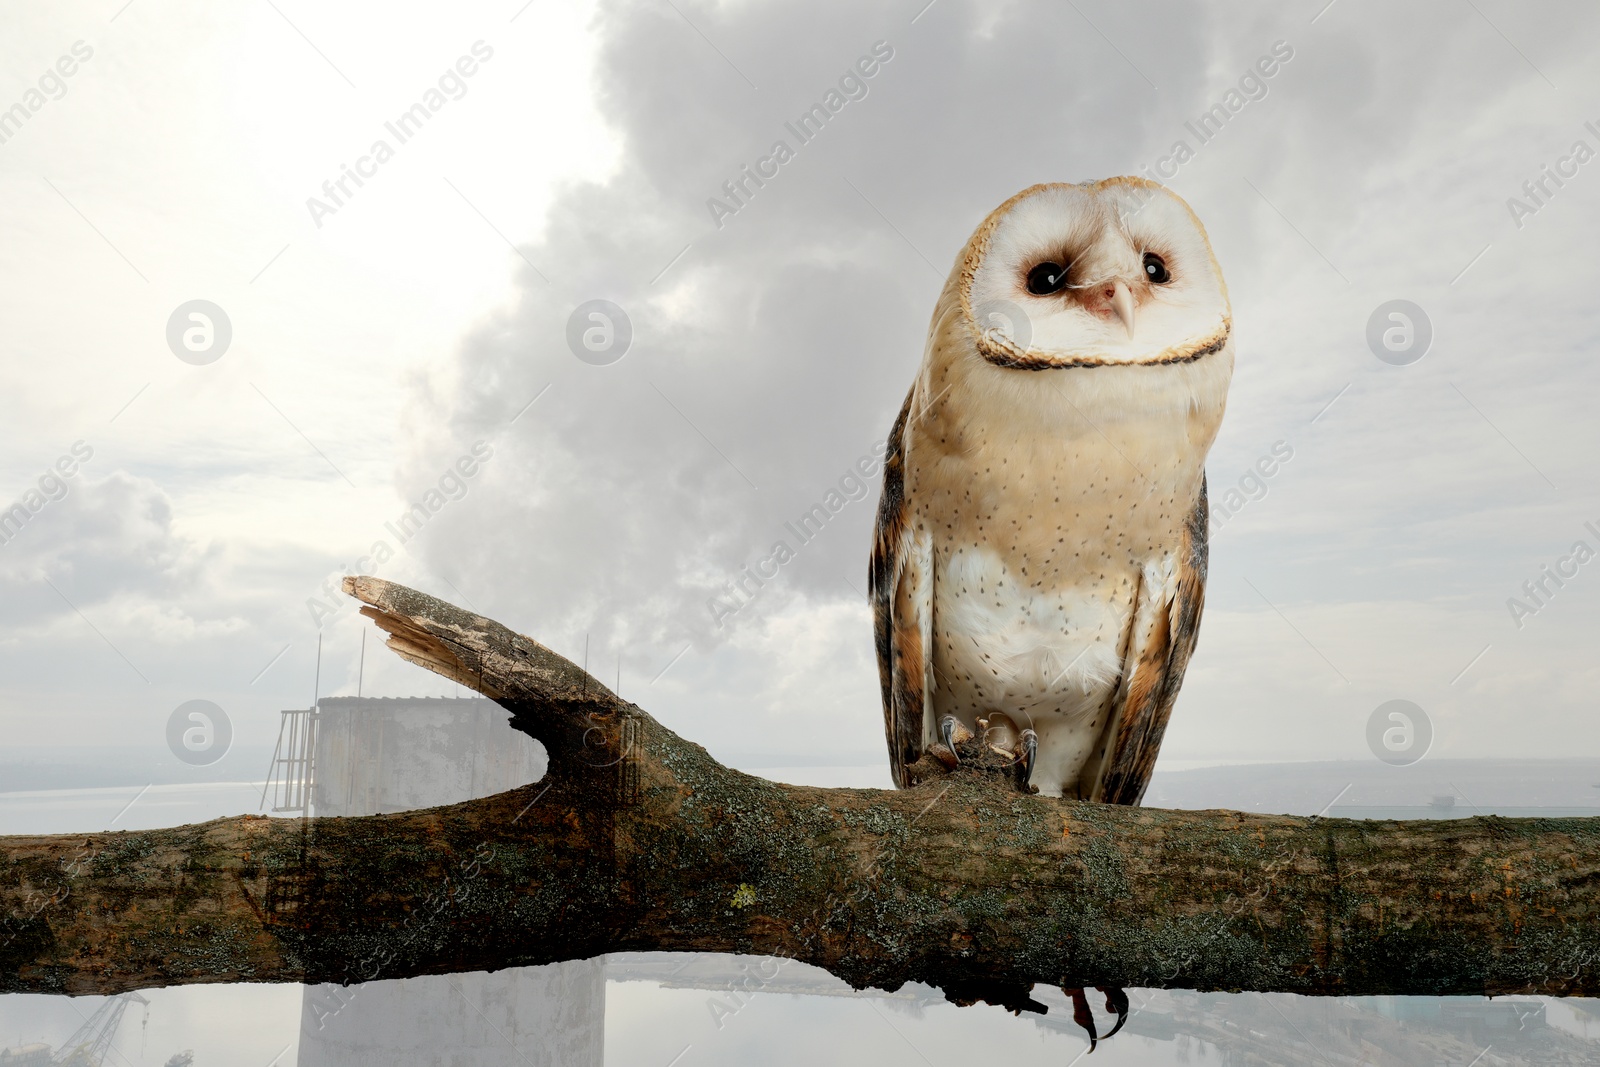 Image of Double exposure of industrial chimney with smoke and owl. Environmental pollution